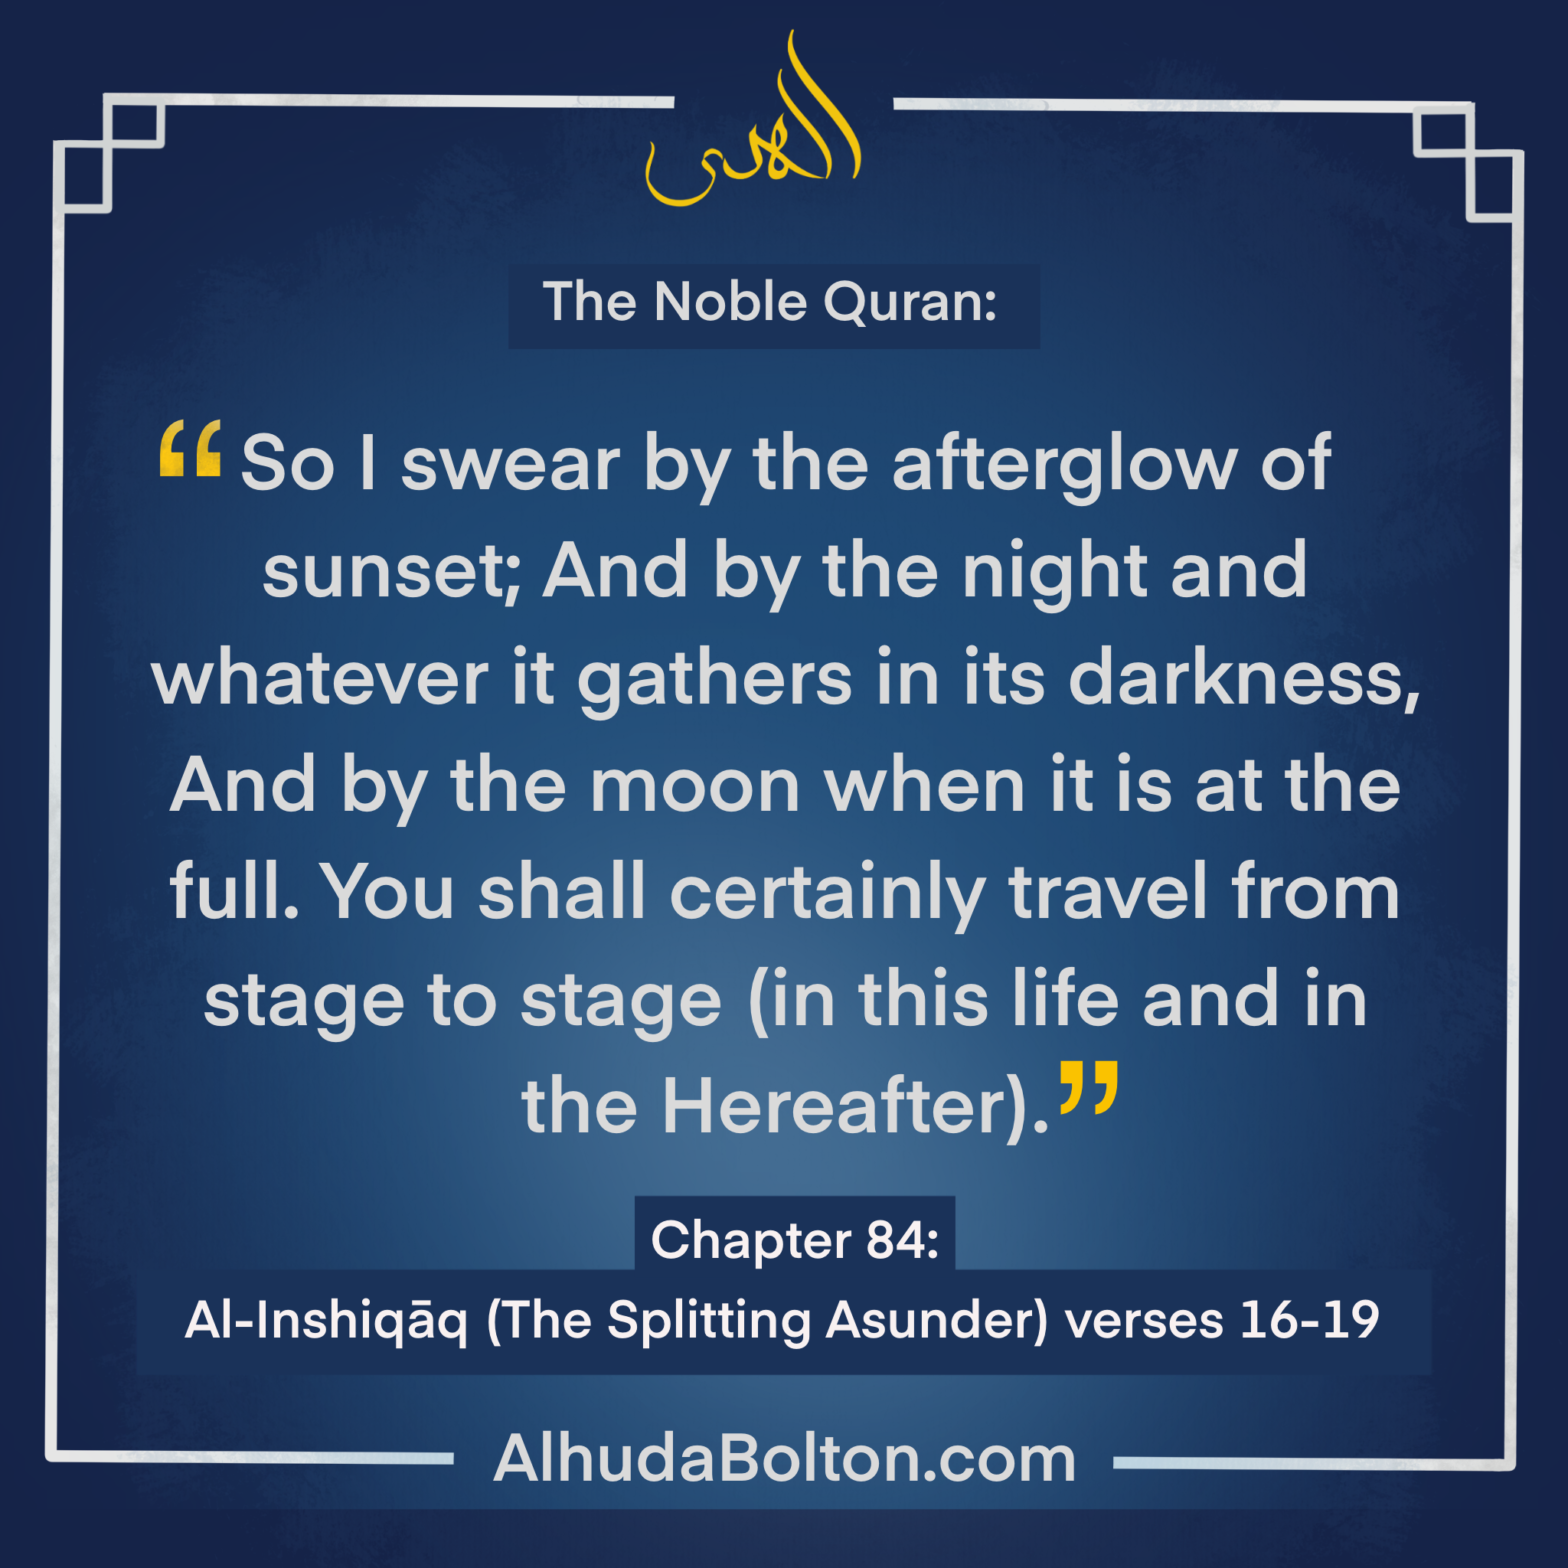 Quran: From Stage to Stage